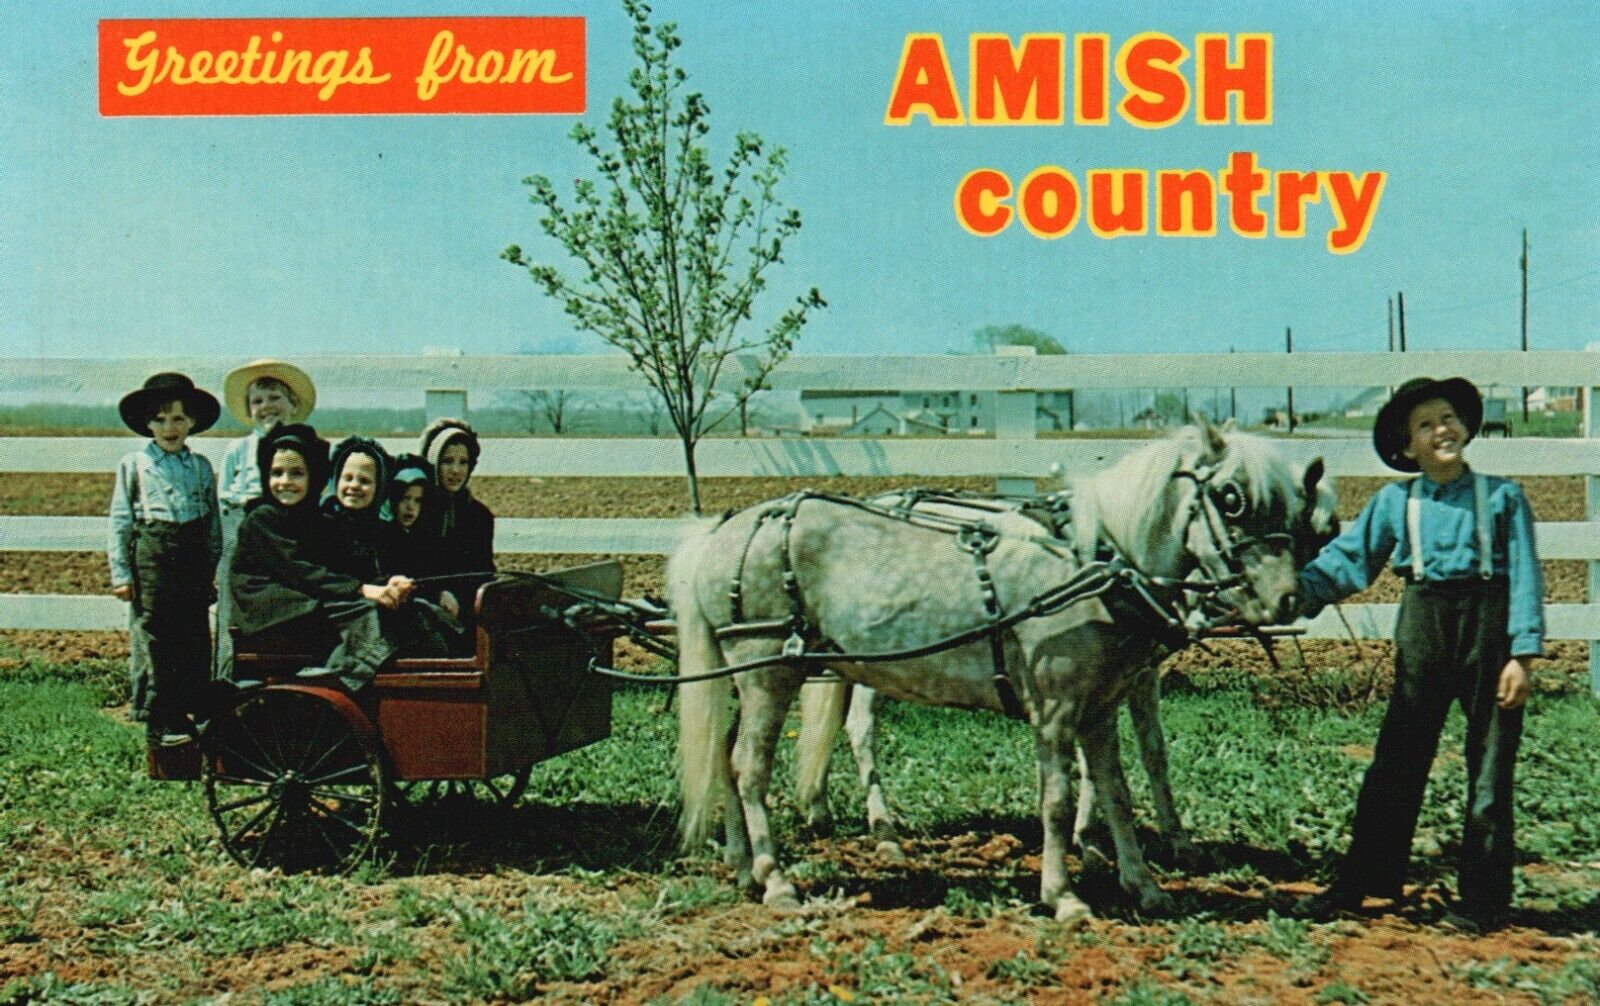 Postcard PA Greetings from Amish Country Kids Ponies & Cart Vintage PC e6648